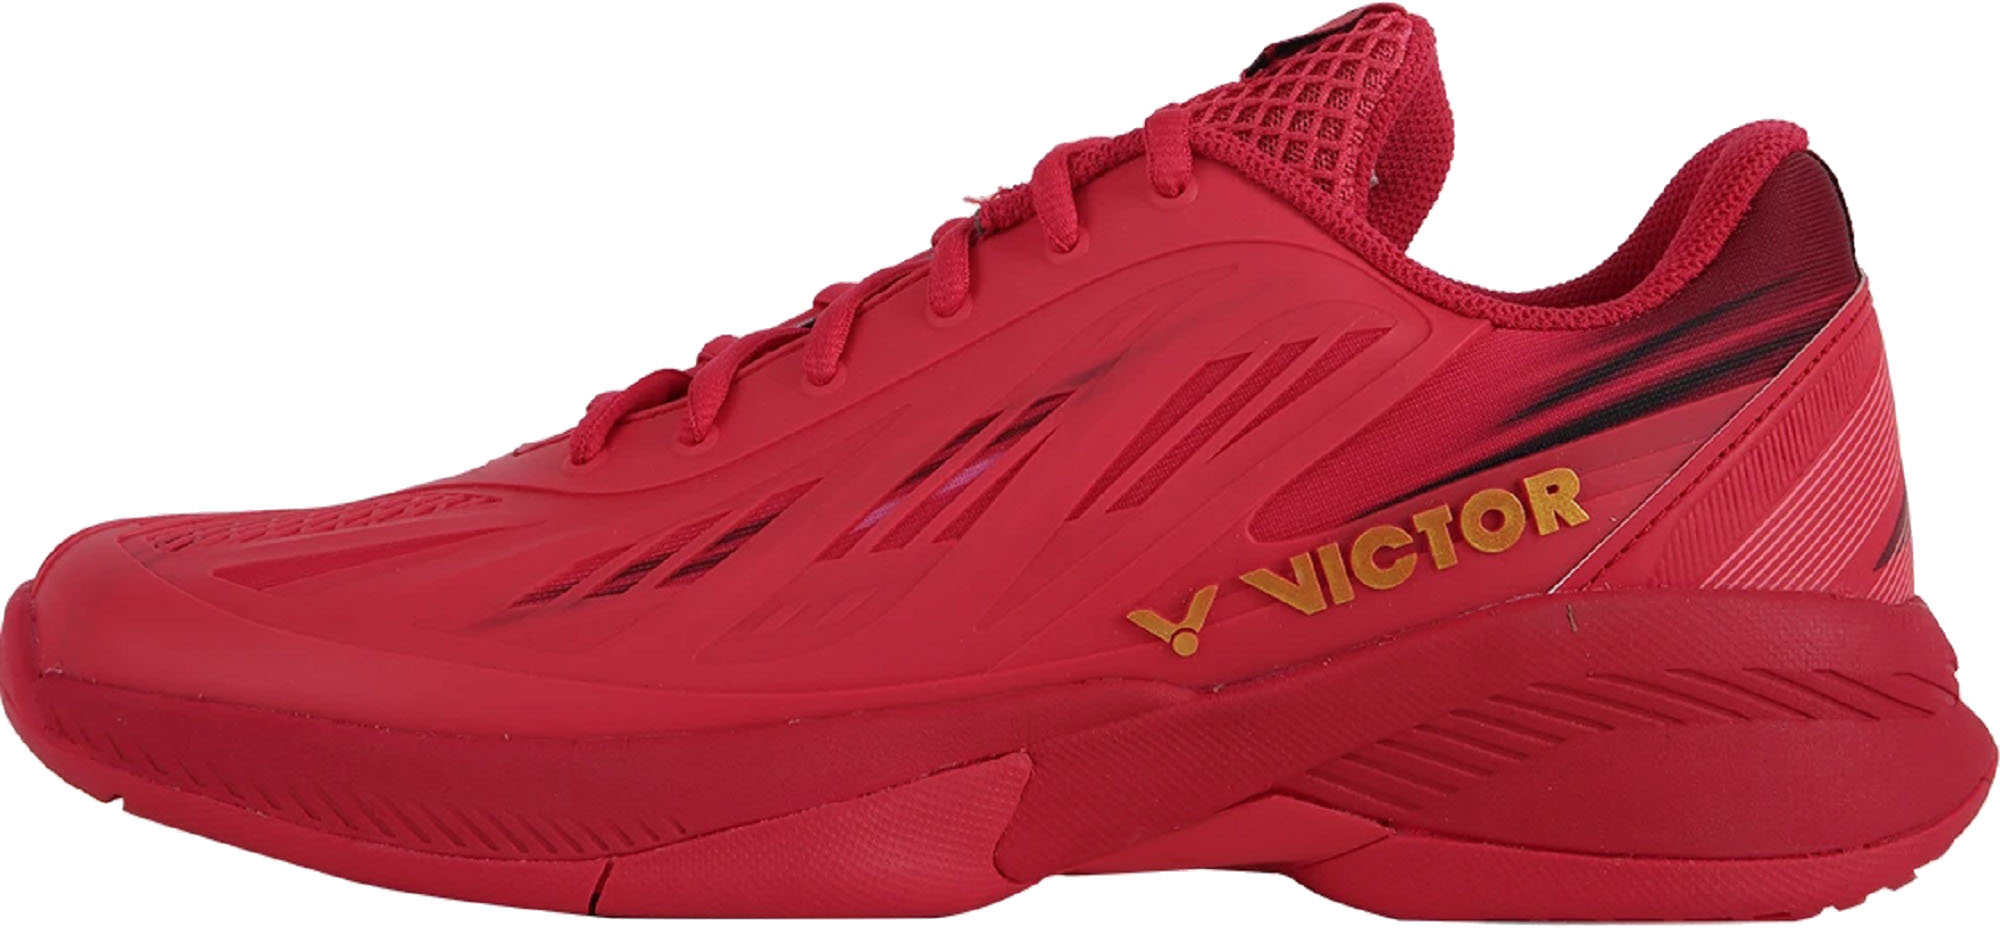 Boty na badminton VICTOR A780 D red